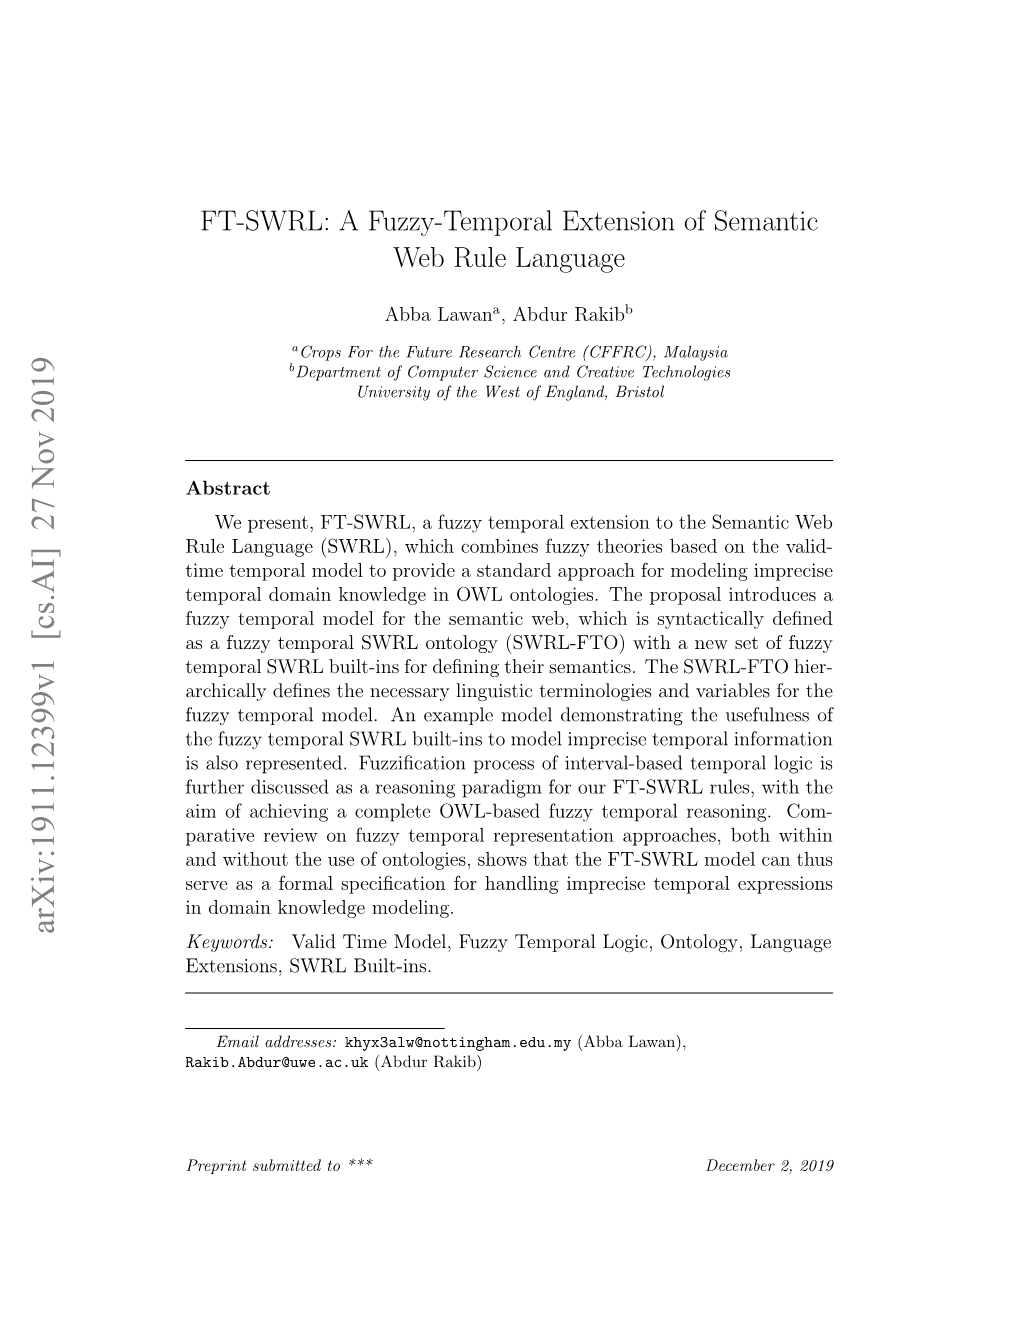 FT-SWRL: a Fuzzy-Temporal Extension of Semantic Web Rule Language